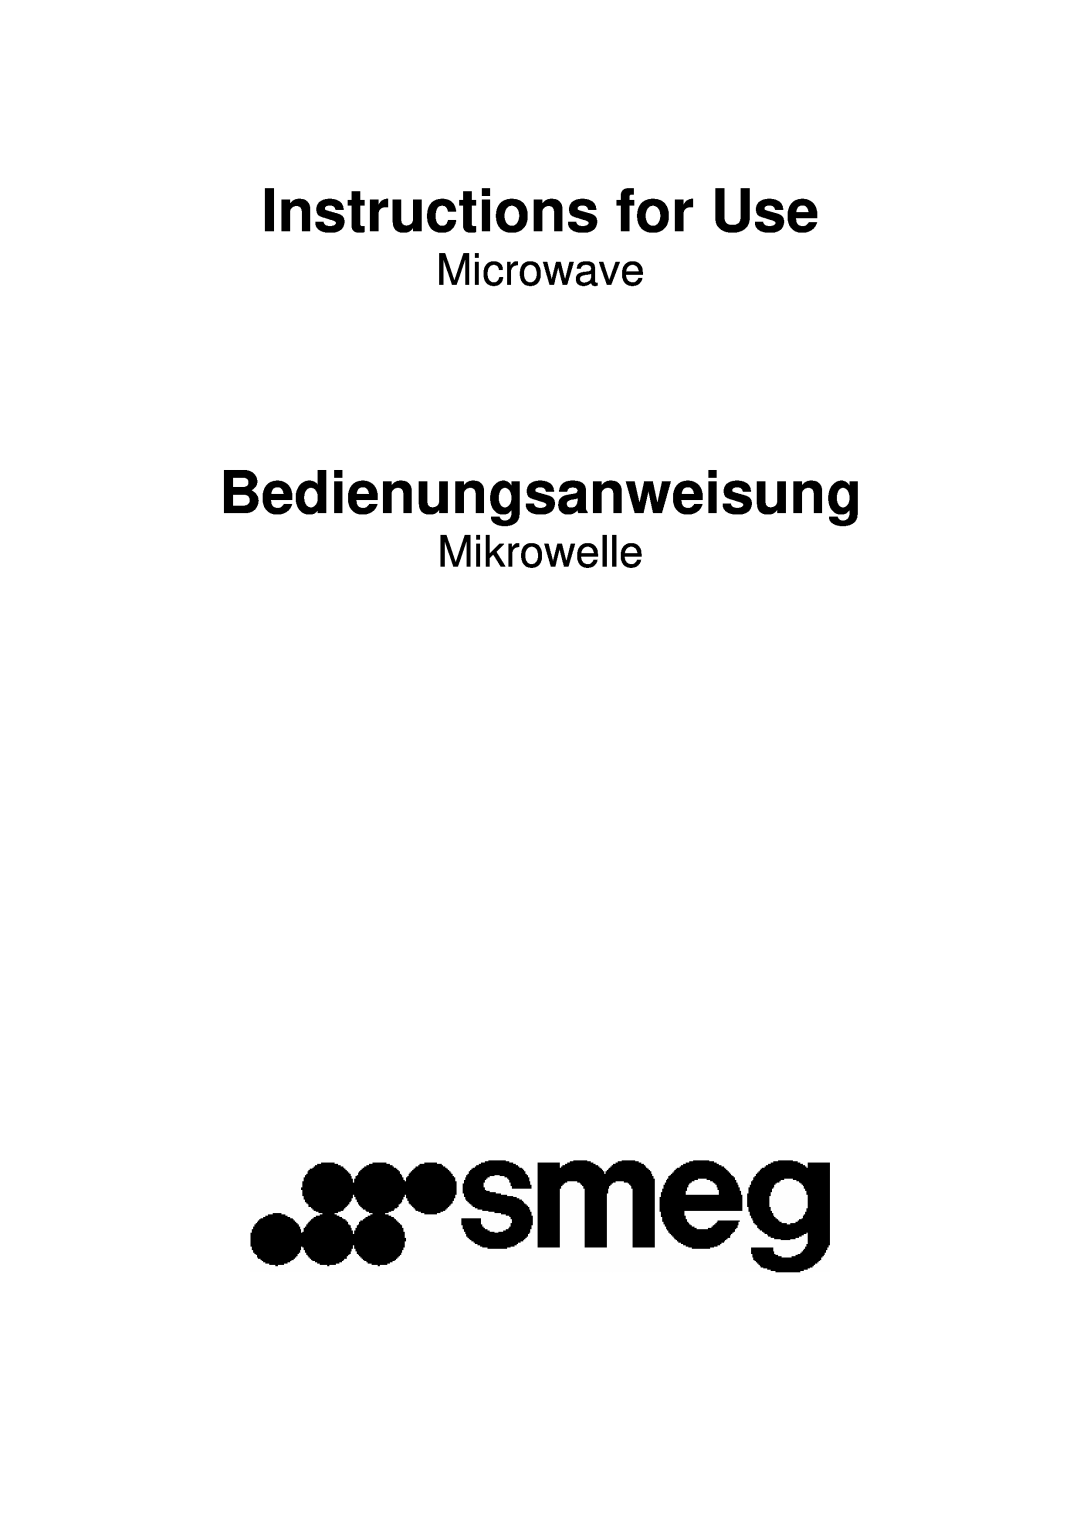 Smeg S45MCX manual Instructions for Use, Bedienungsanweisung, Microwave, Mikrowelle 